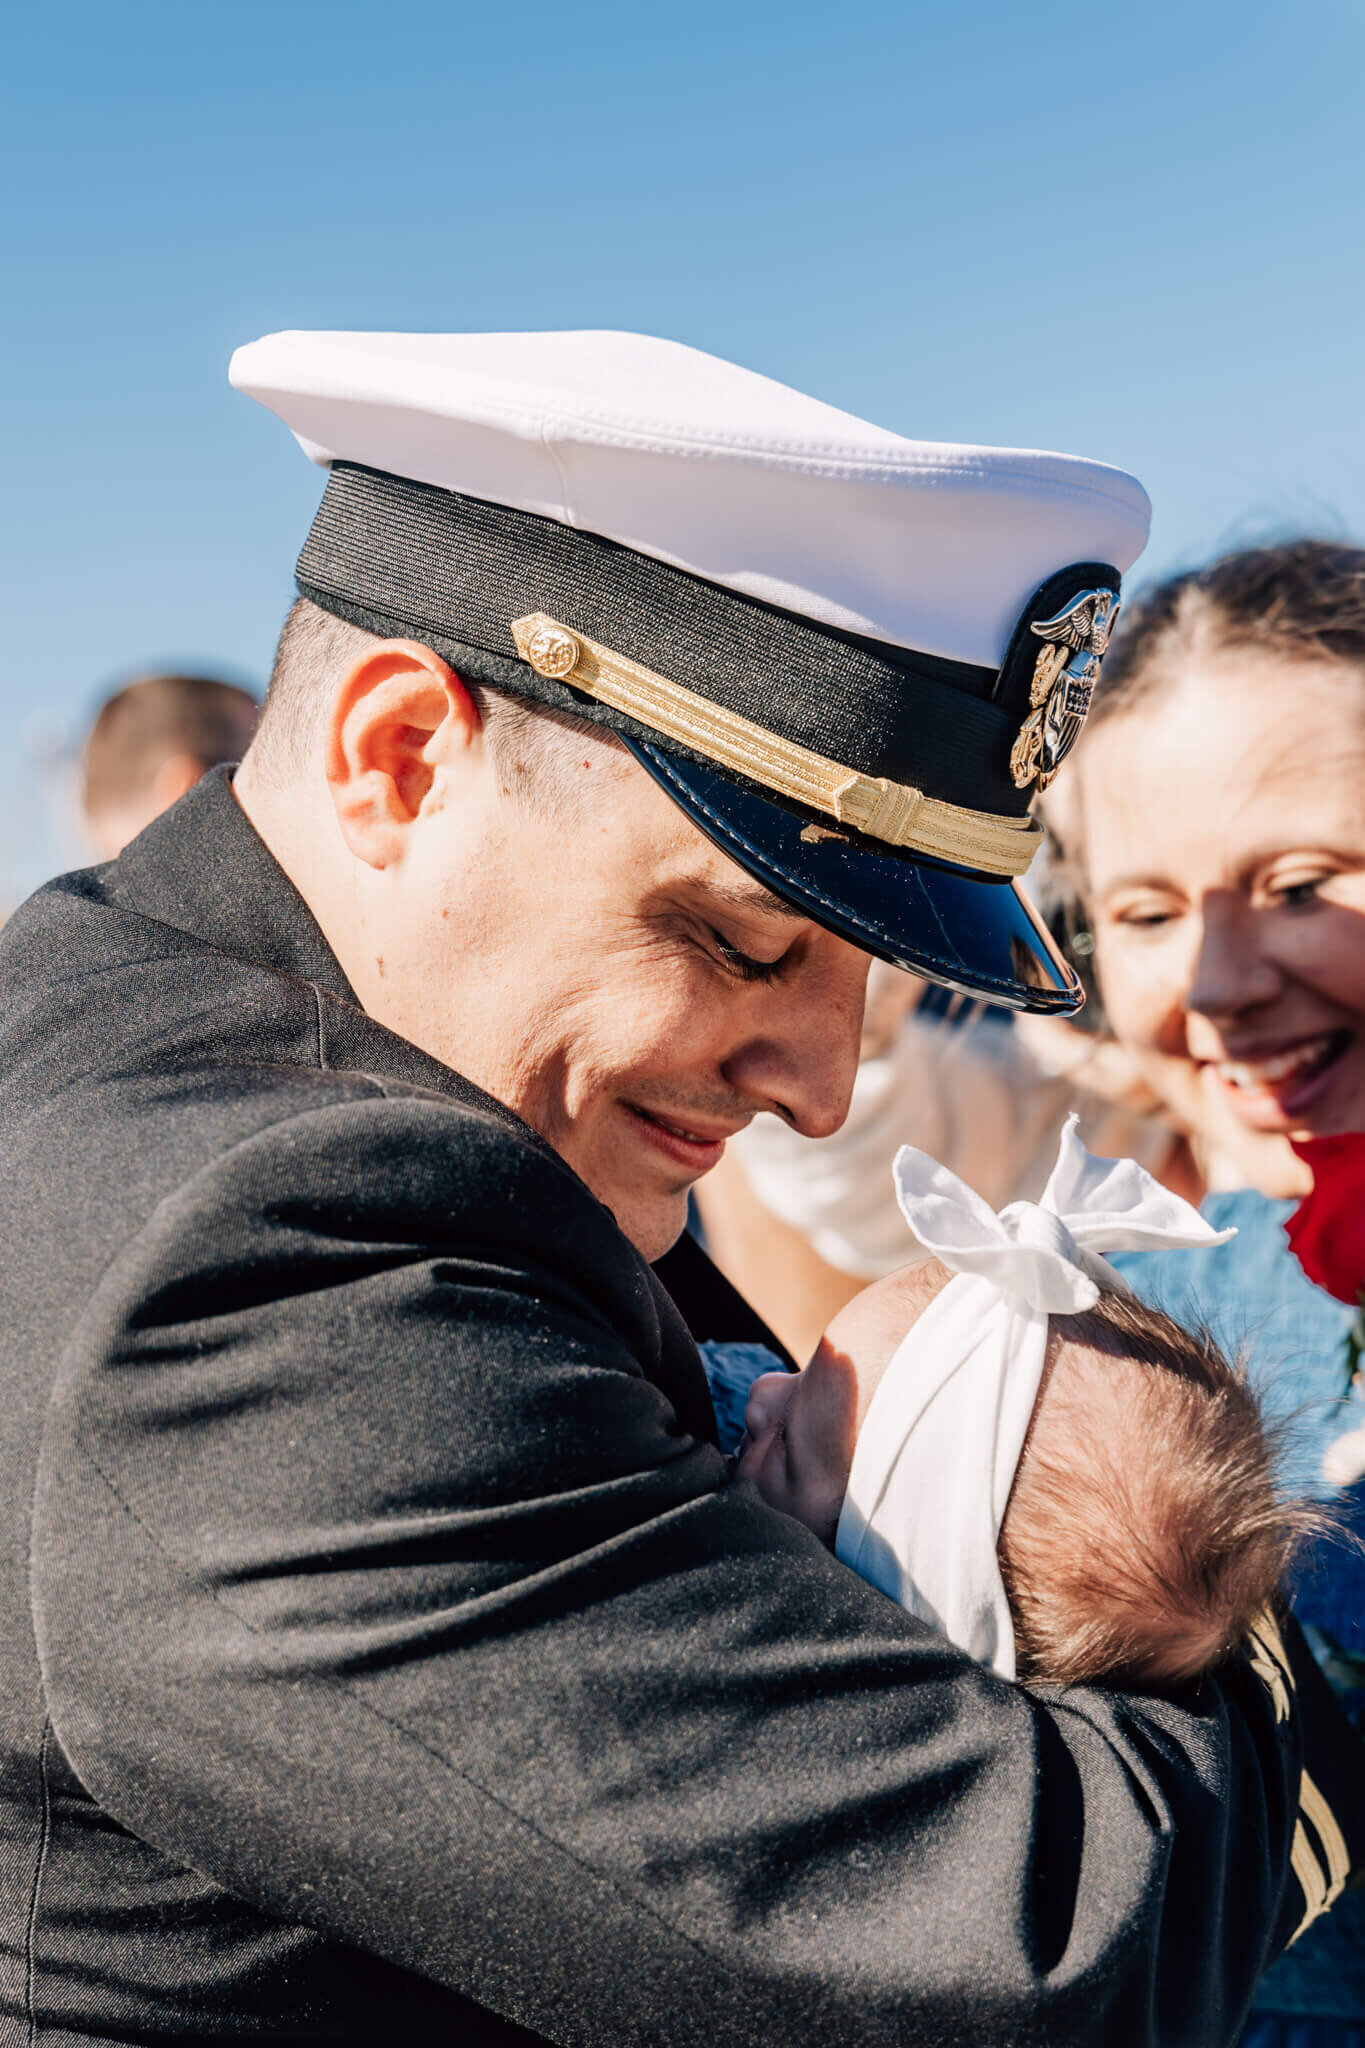 Naval officer looks down at new baby, meeting baby for the first time, at emotional USS North Dakota homecoming in Groton, CT.